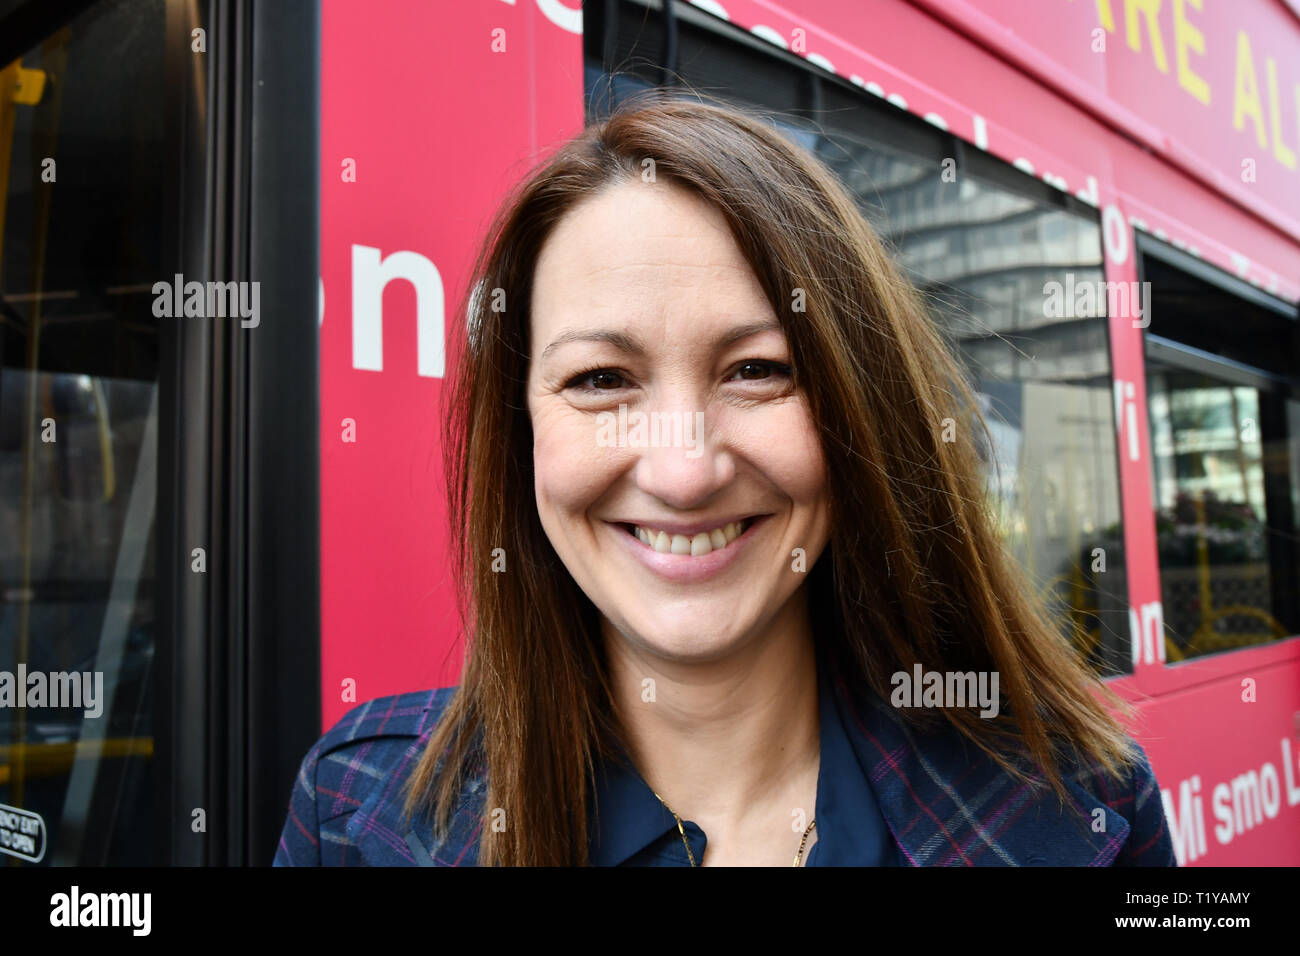 London, UK. 29th March, 2019. Nina from Bulgaria attend The Mayor of London, Sadiq Khan, launch a branded ‘We are all Londoners' bus as it begins a four-day ‘Advice Roadshow' around the capital. The bus will visit locations in areas with high numbers of European nationals, offering them guidance on how to apply for Settled to Status to remain in the UK following Brexit on 29 March 2019, London, UK. Credit: Picture Capital/Alamy Live News Stock Photo